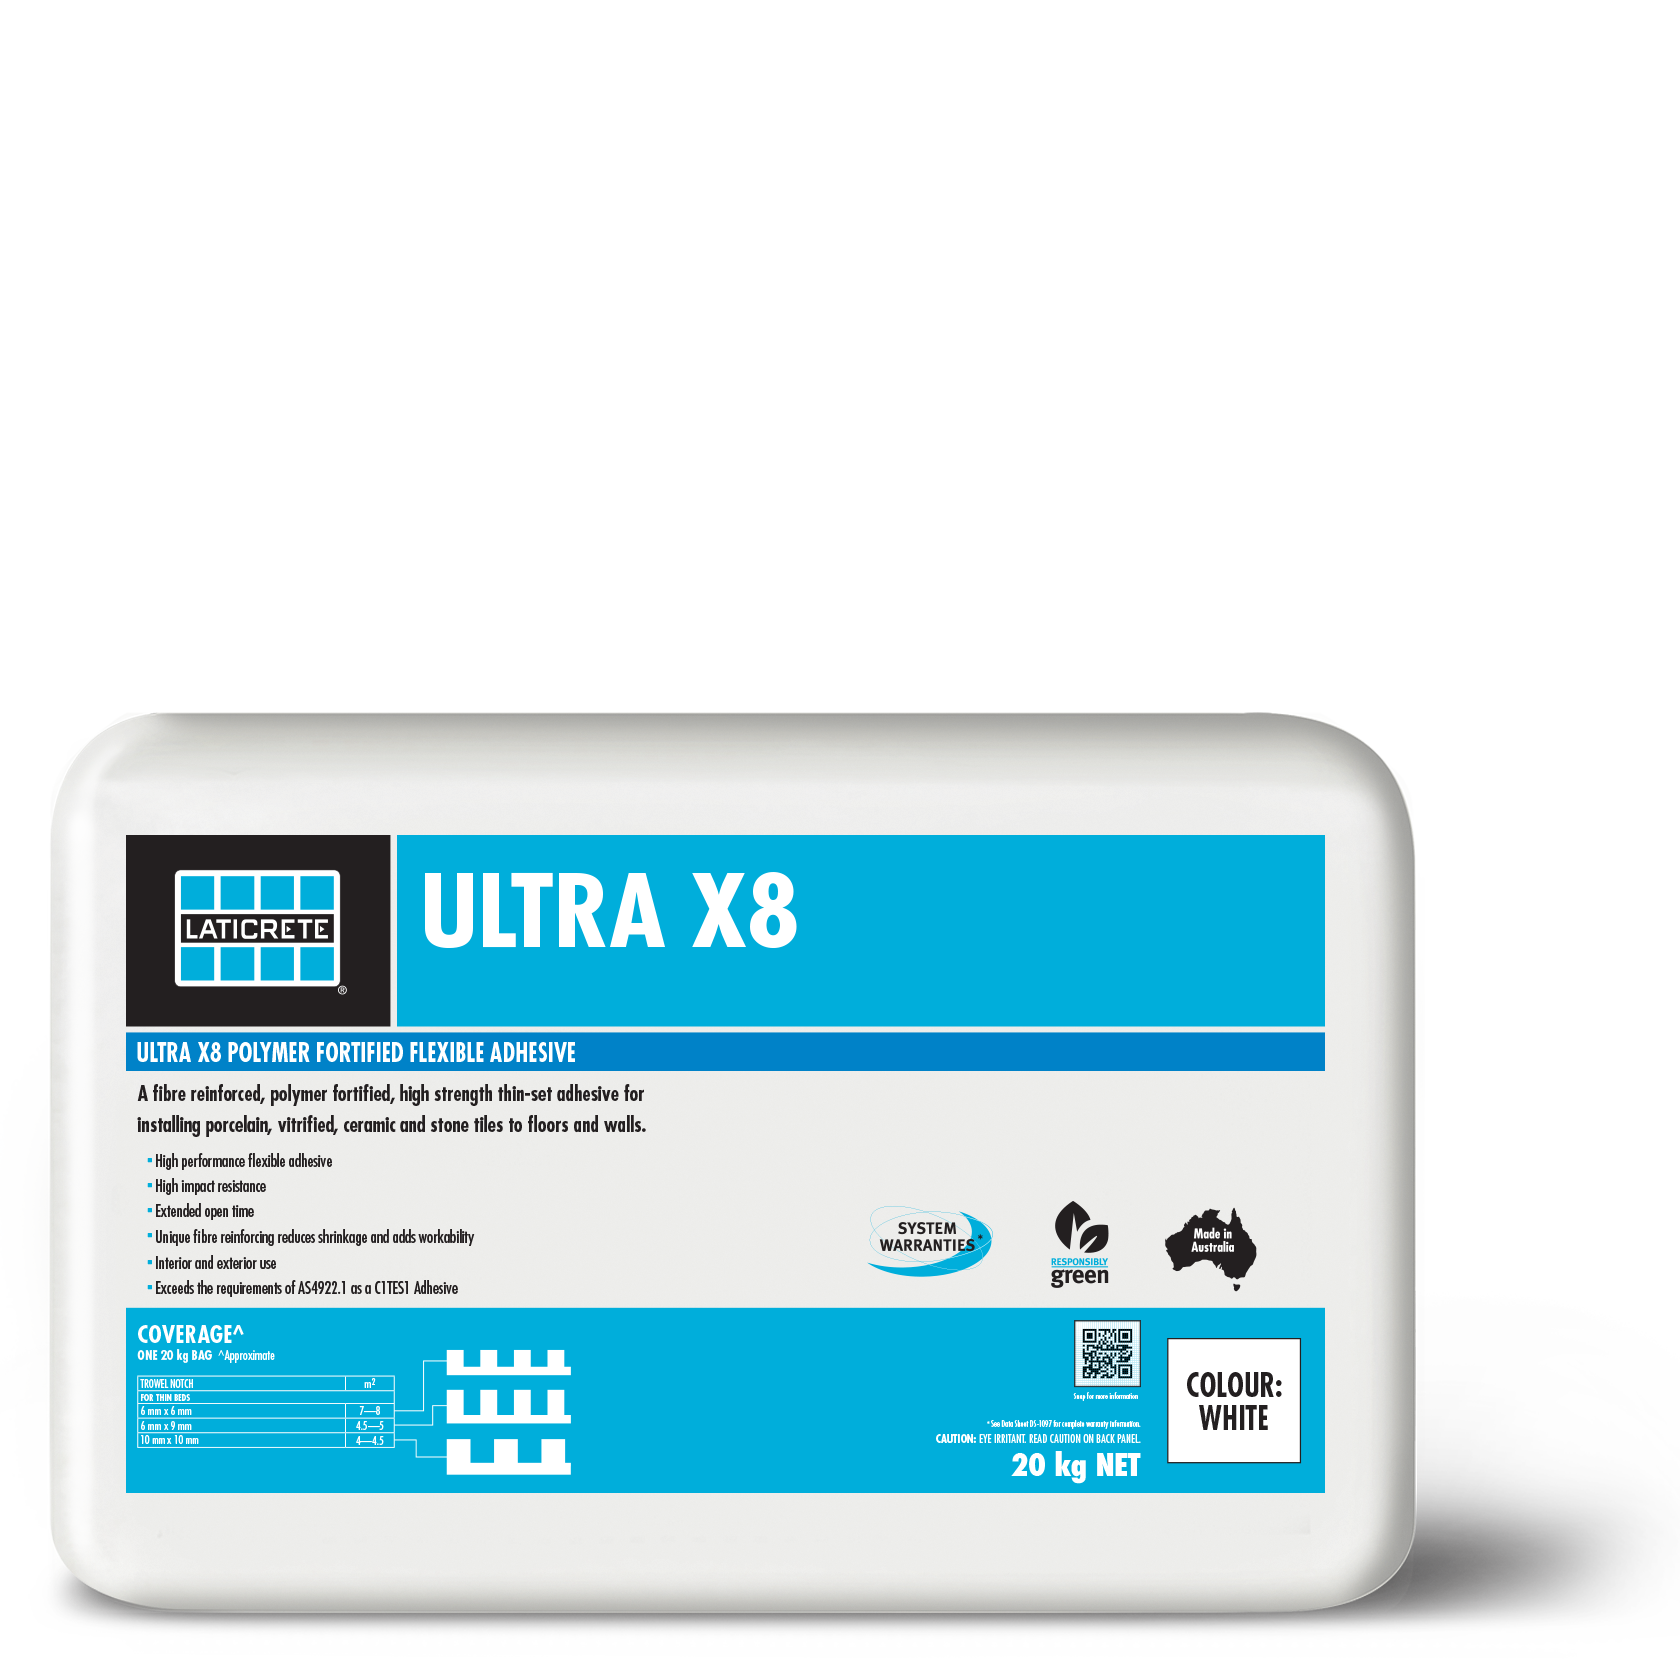 Ultra X8 Polymer Fortified Flexible Adhesive